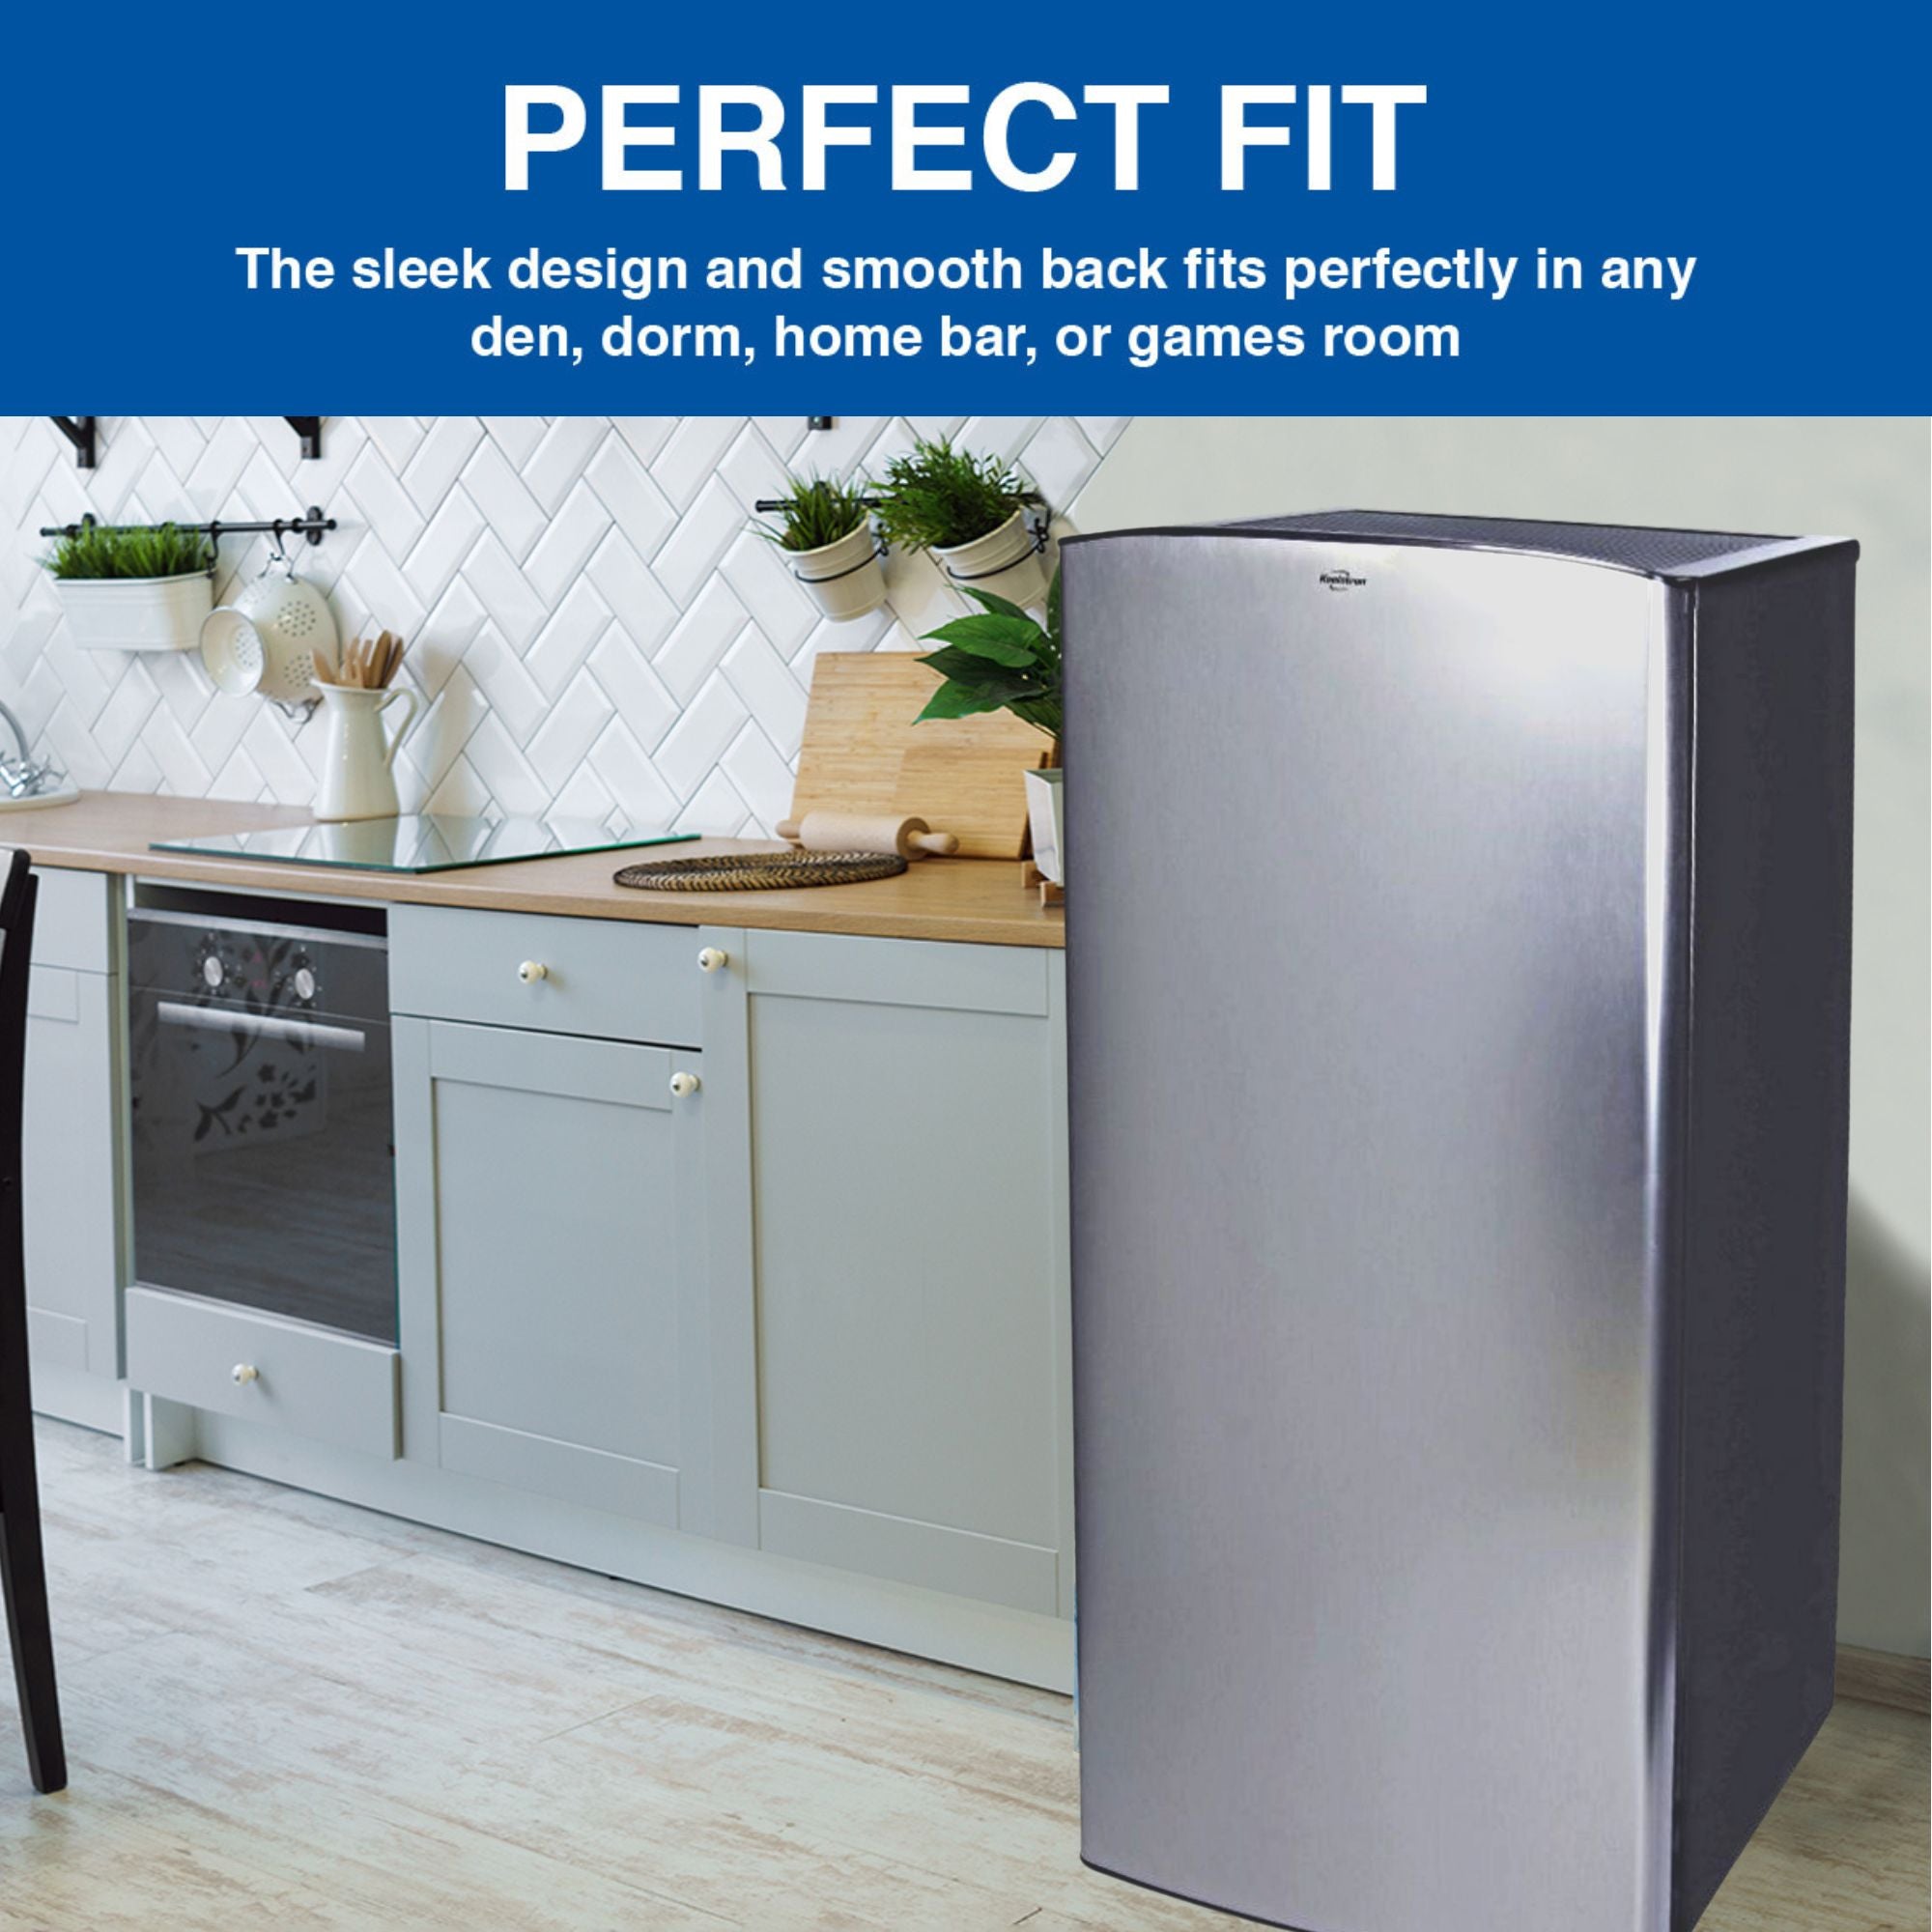 Lifestyle image of black and stainless steel compact fridge with freezer to the right of light gray kitchen cupboards with a wooden countertop, white tile backsplash, and hanging plants. Text above reads, "Perfect fit: The sleek design and smooth back fits perfectly in any den, home bar, or games room"